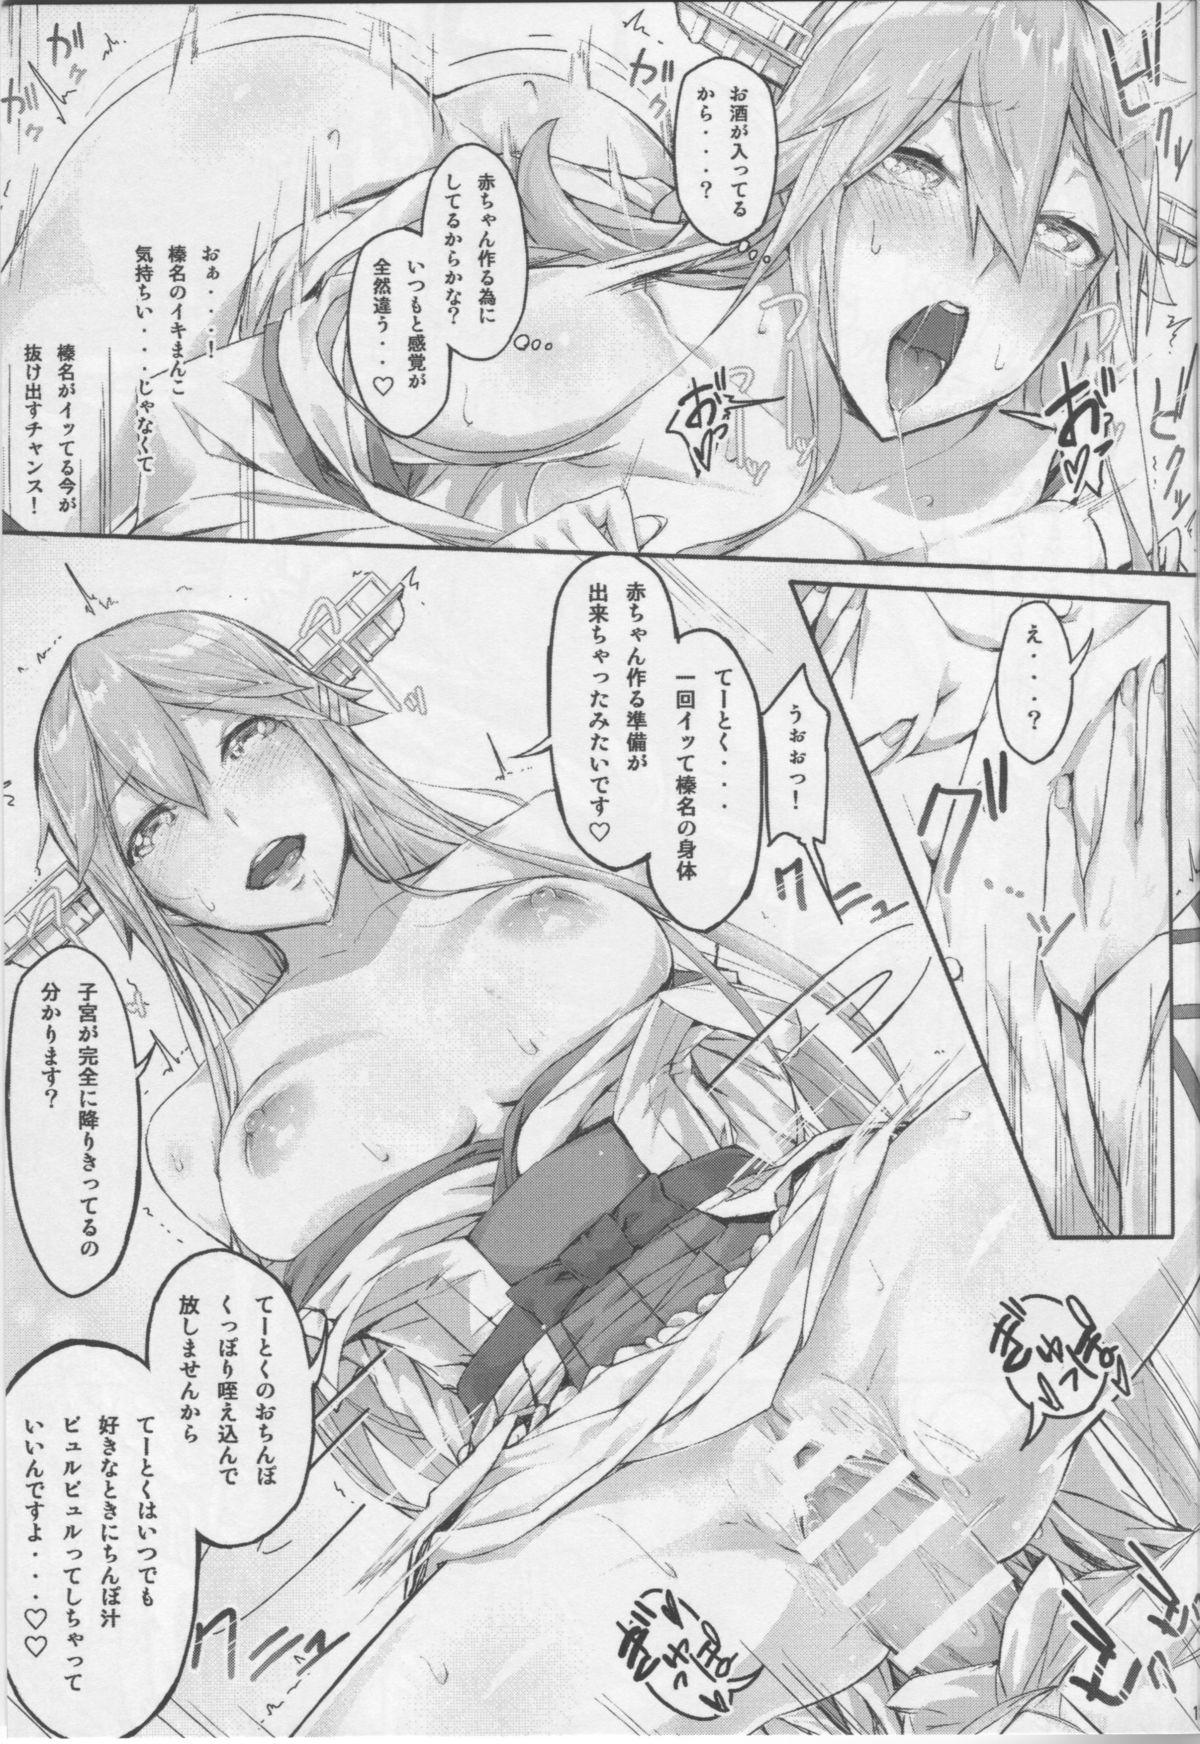 Grosso Fleet Girls Pack vol. 1 - Kantai collection Passion - Page 12